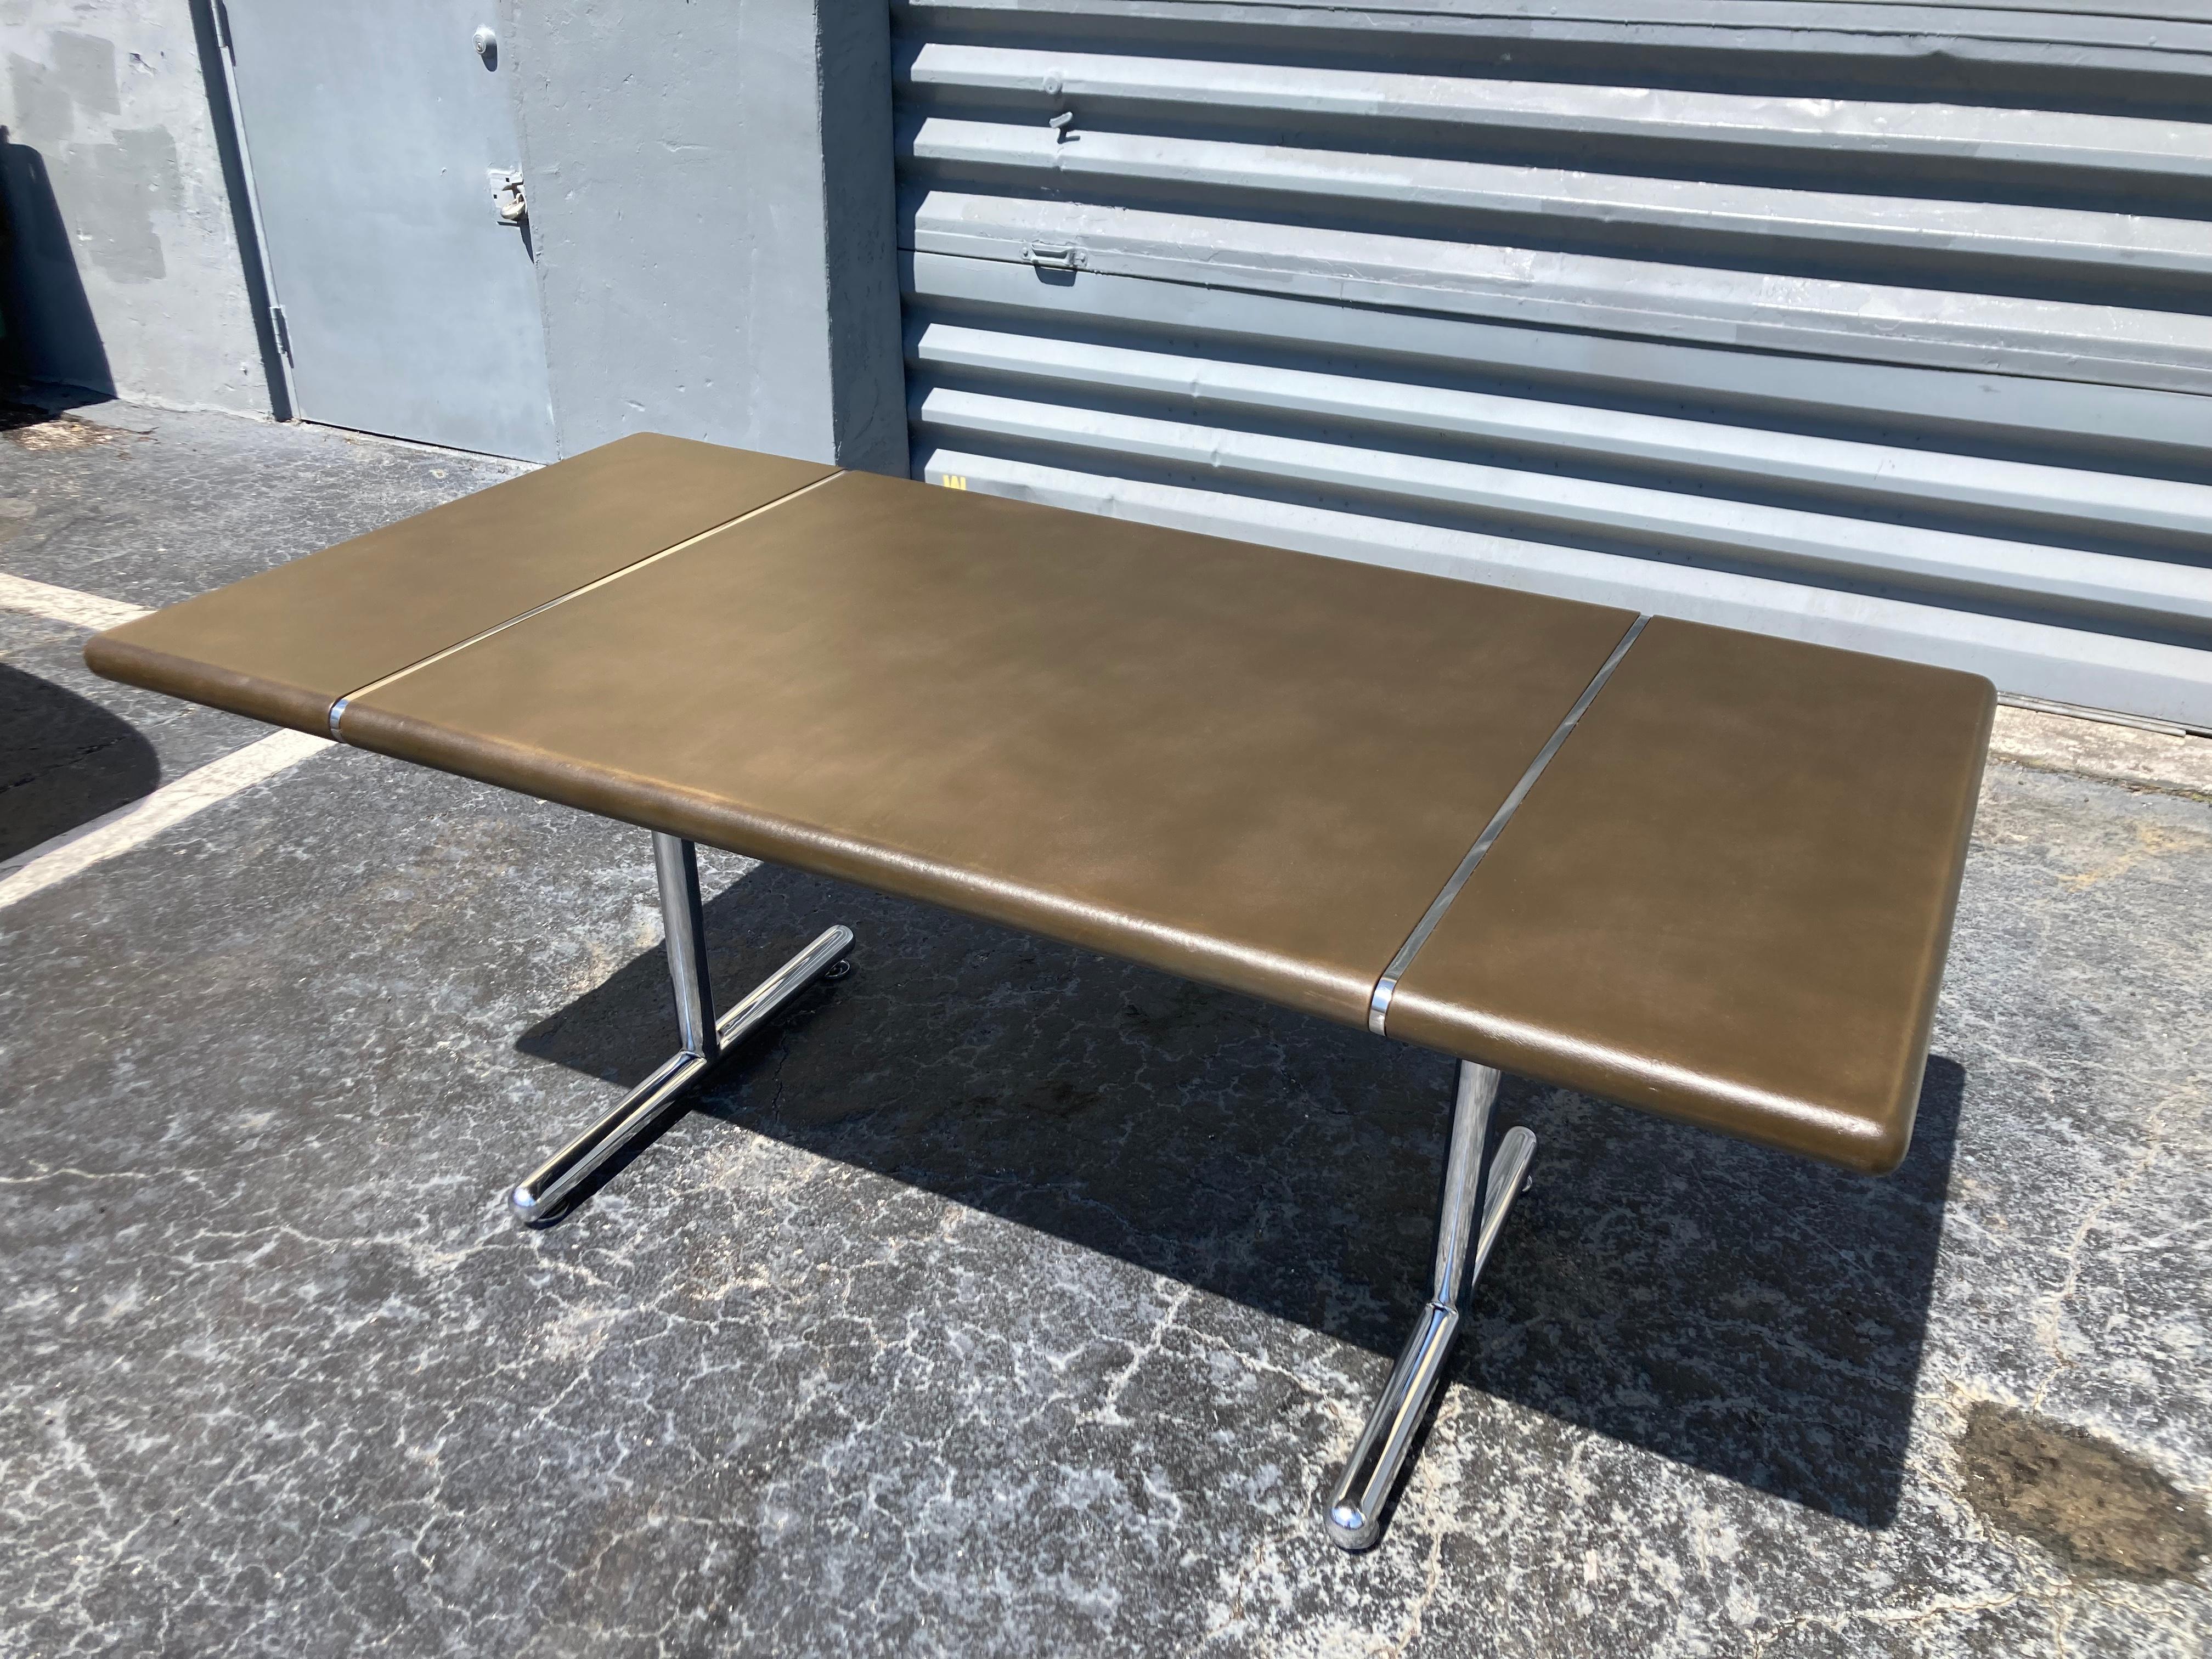 Great leather top table with chrome base. Leather has a green brown color with a rich patina. Please see pictures. High-quality. Ready for a new home.